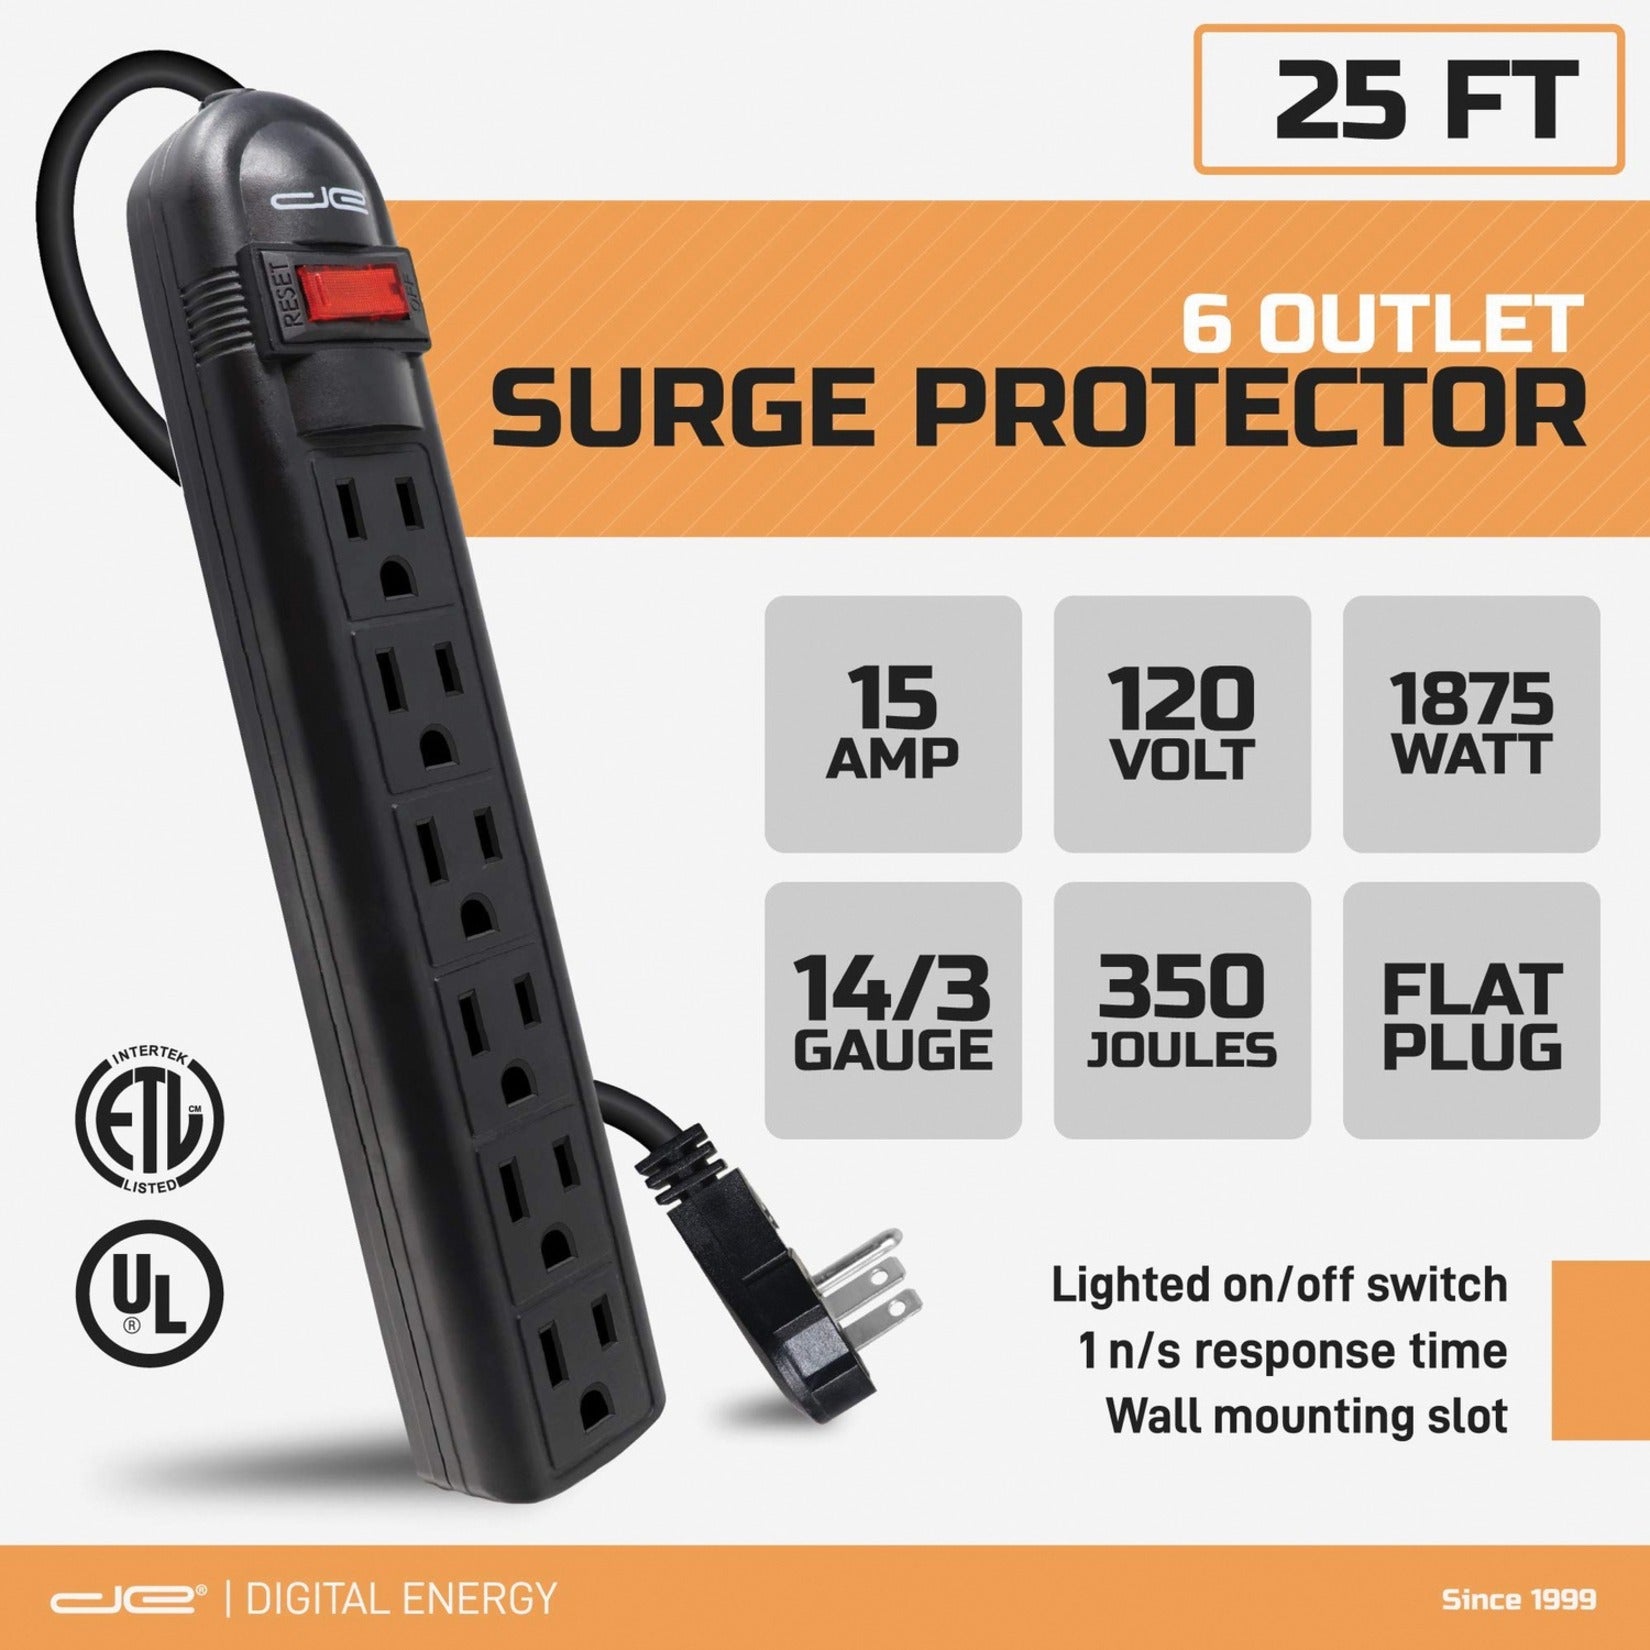 Digital Energy World DSS5-1043 6-Outlet Surge Protector Power Strip, Black, 25-Foot Cord